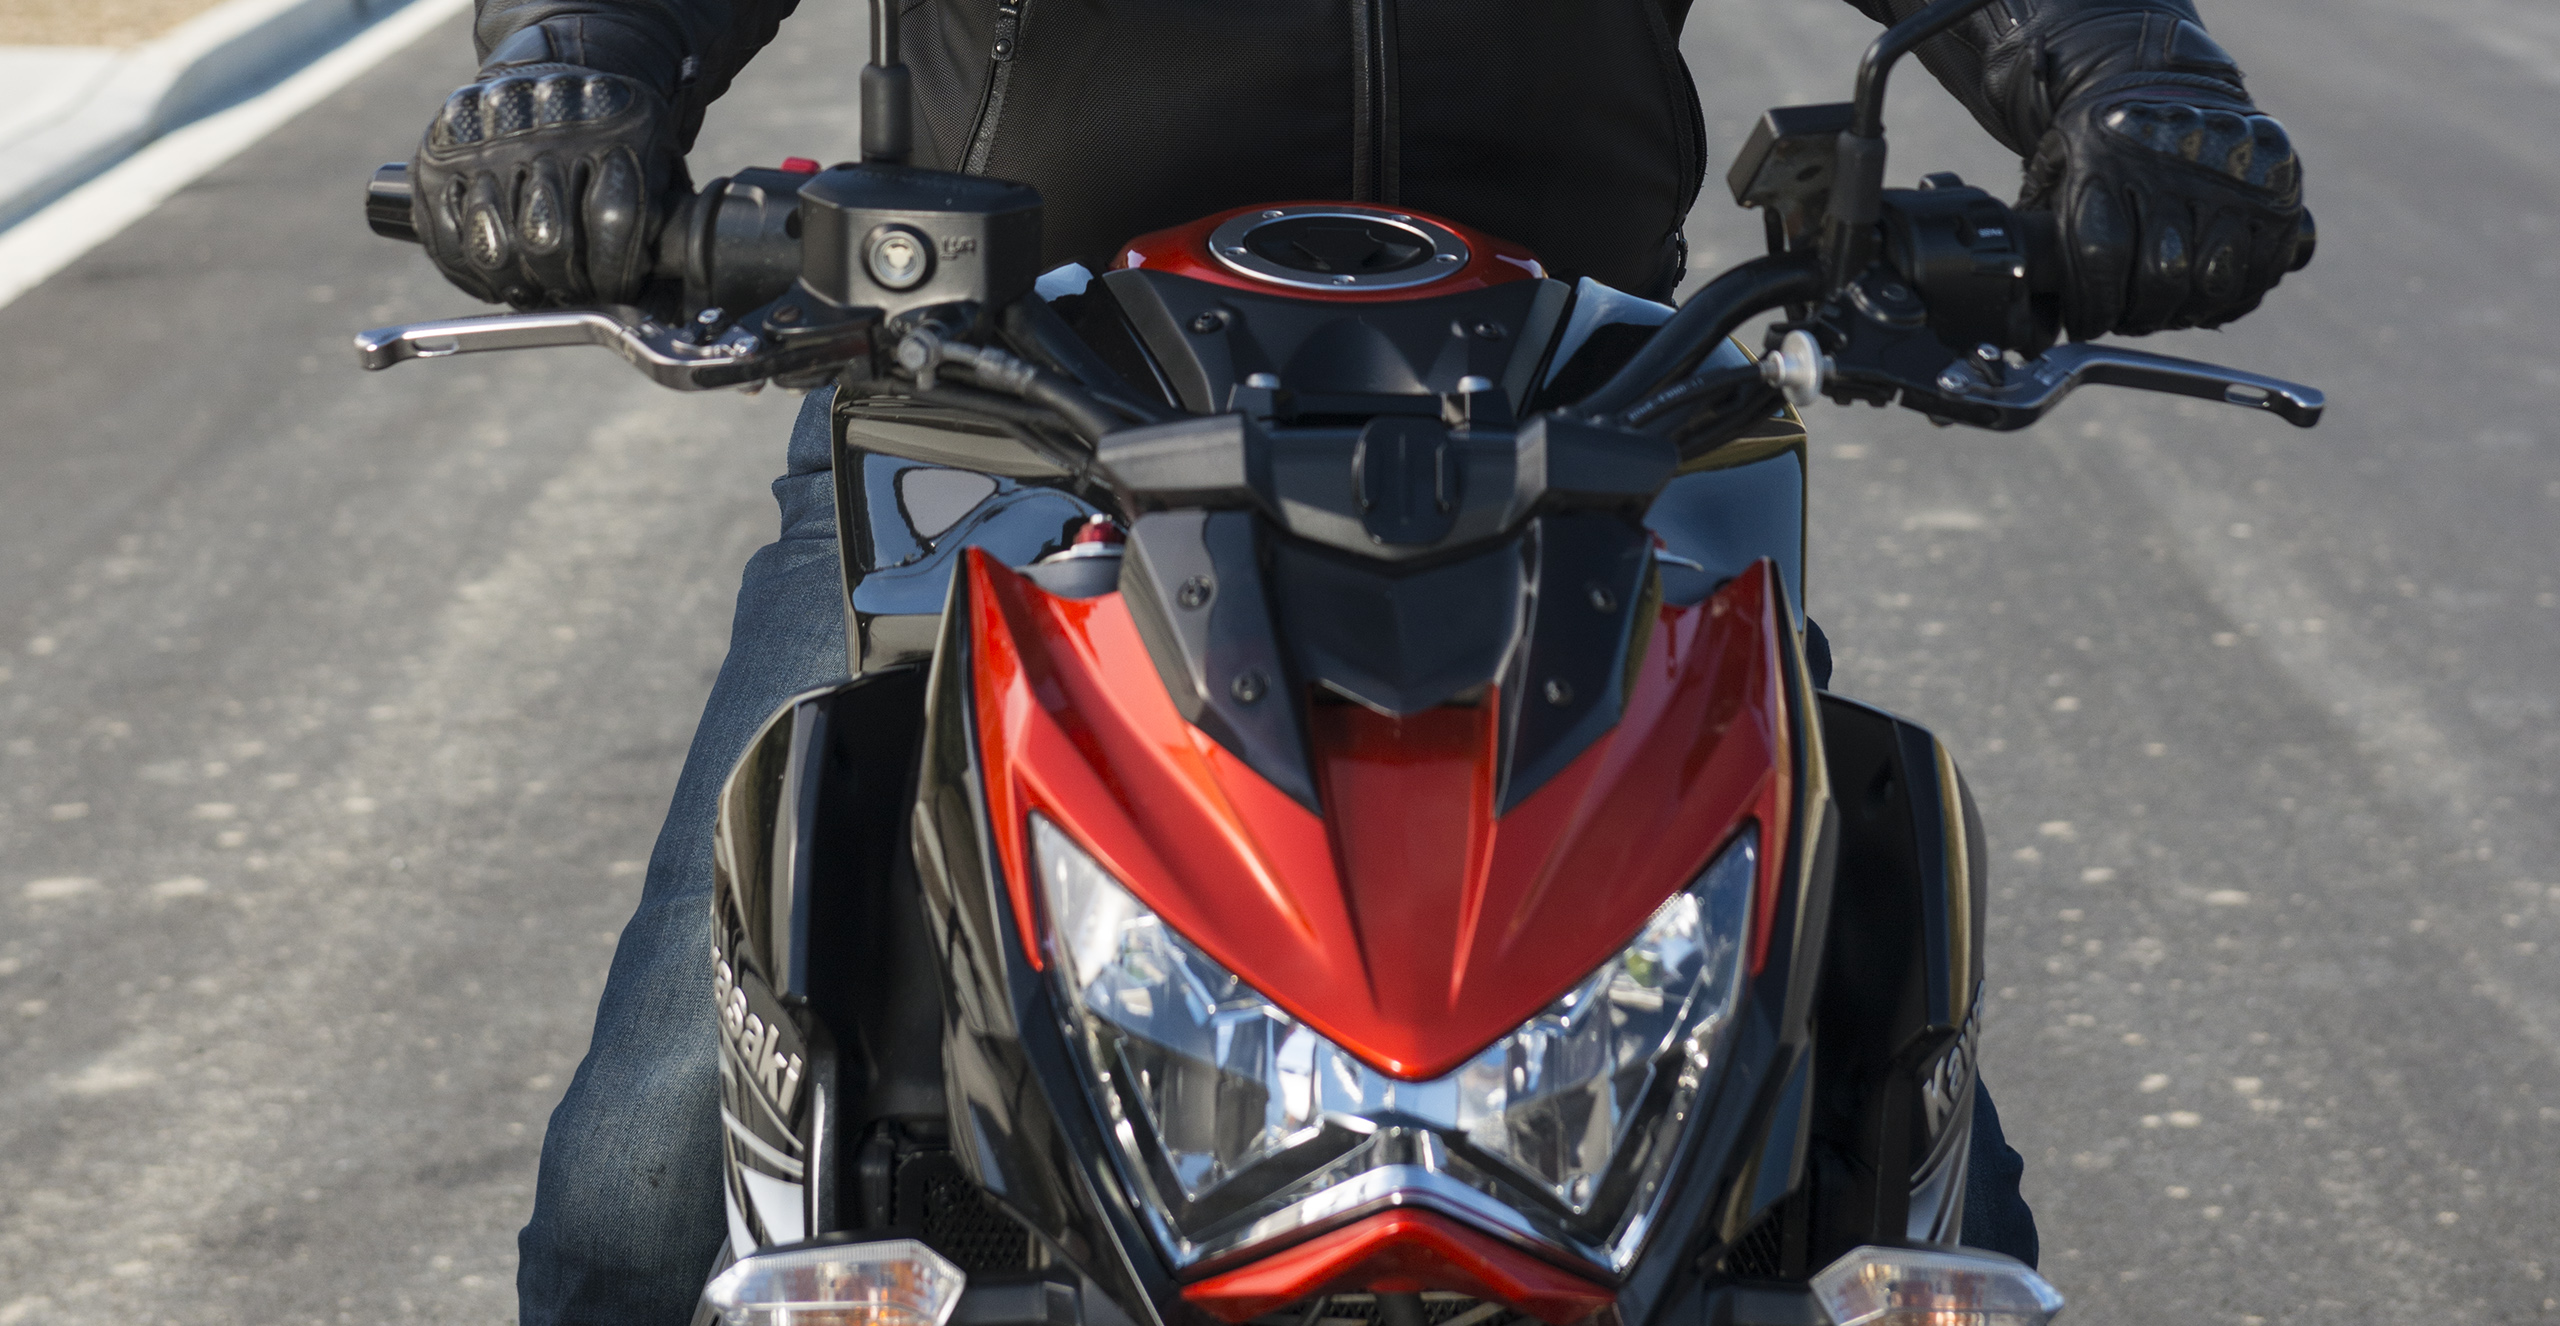 Close up of the front of a street bike with rider